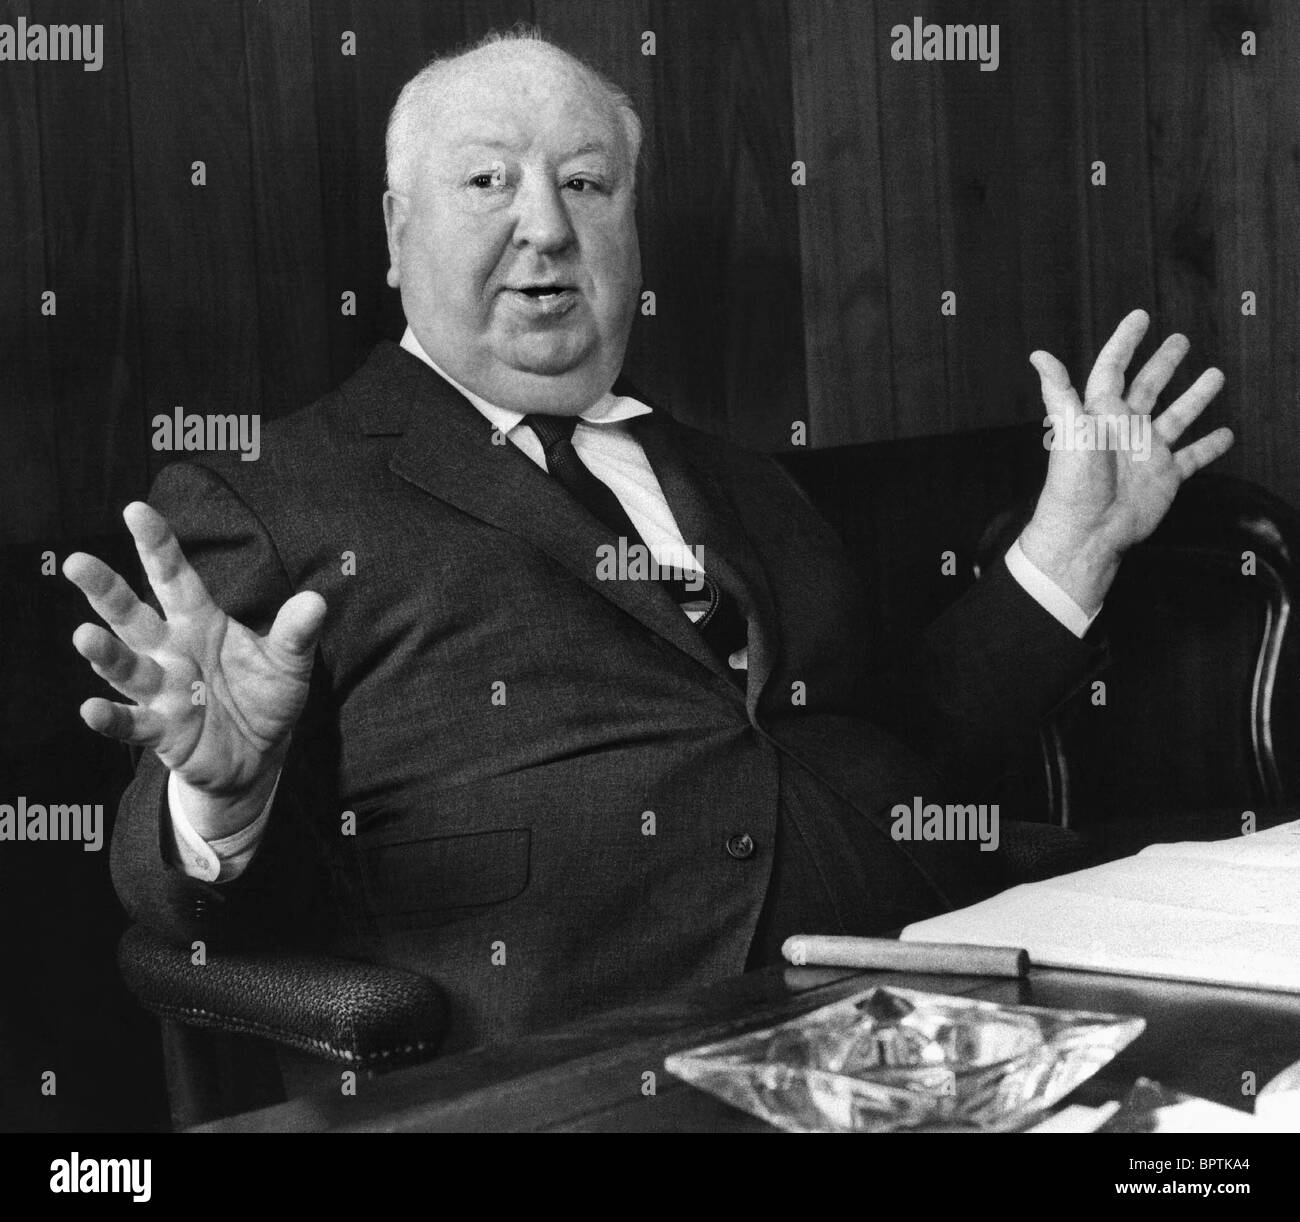 ALFRED HITCHCOCK DIRECTOR (1968) Stock Photo